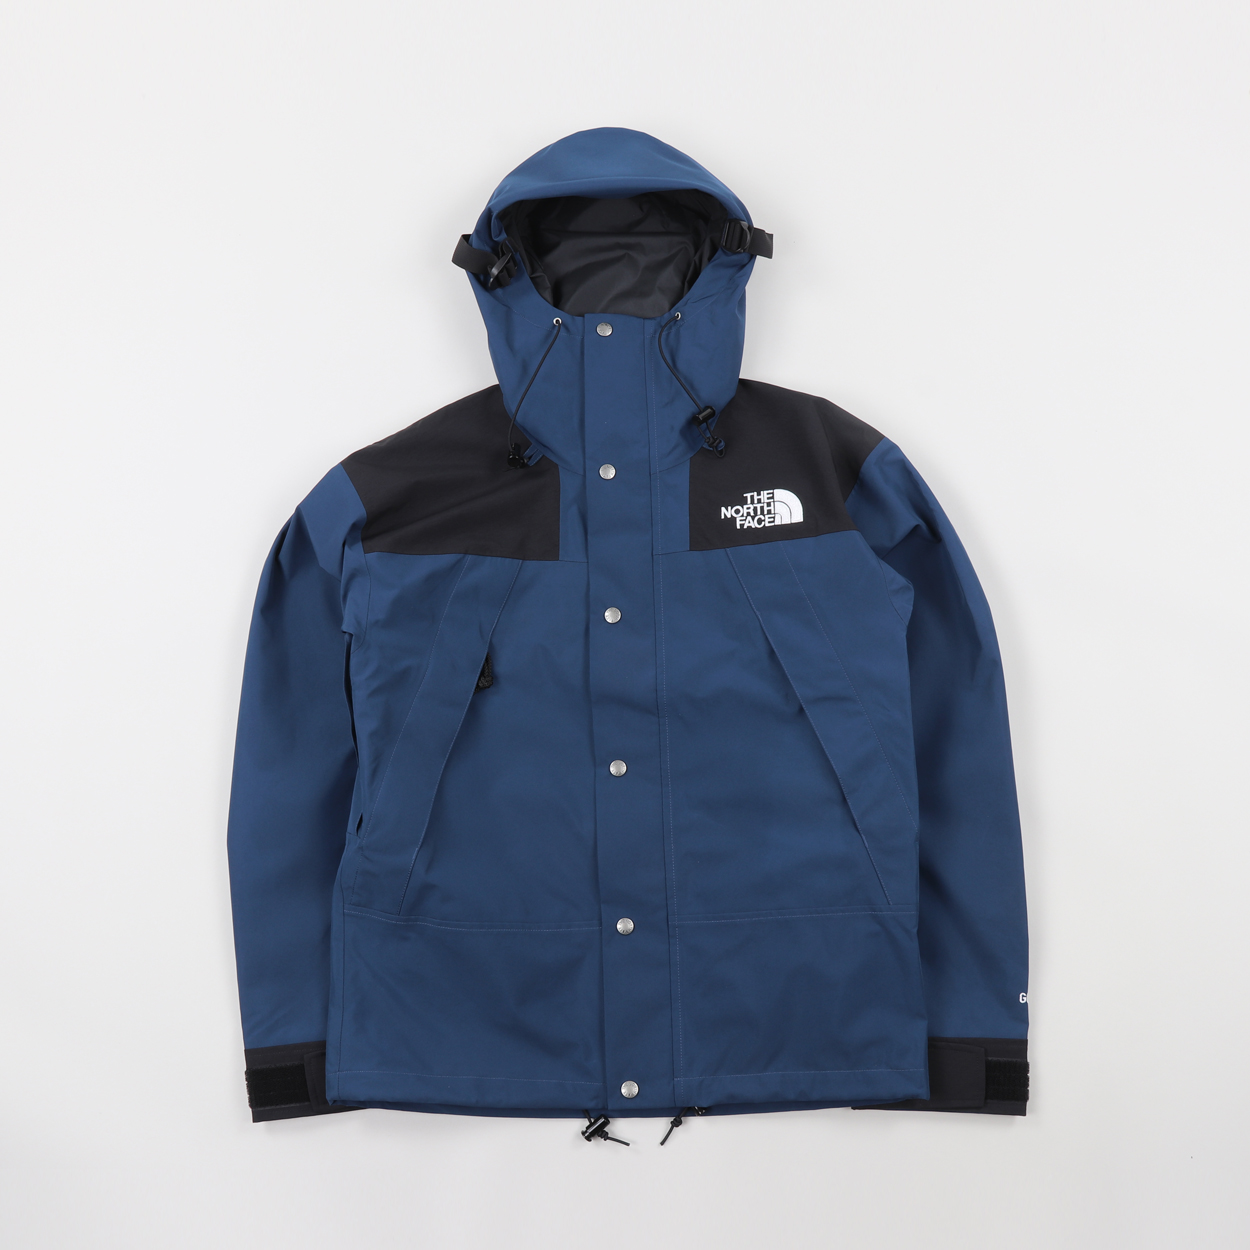 north face gore tex 1990 mountain jacket